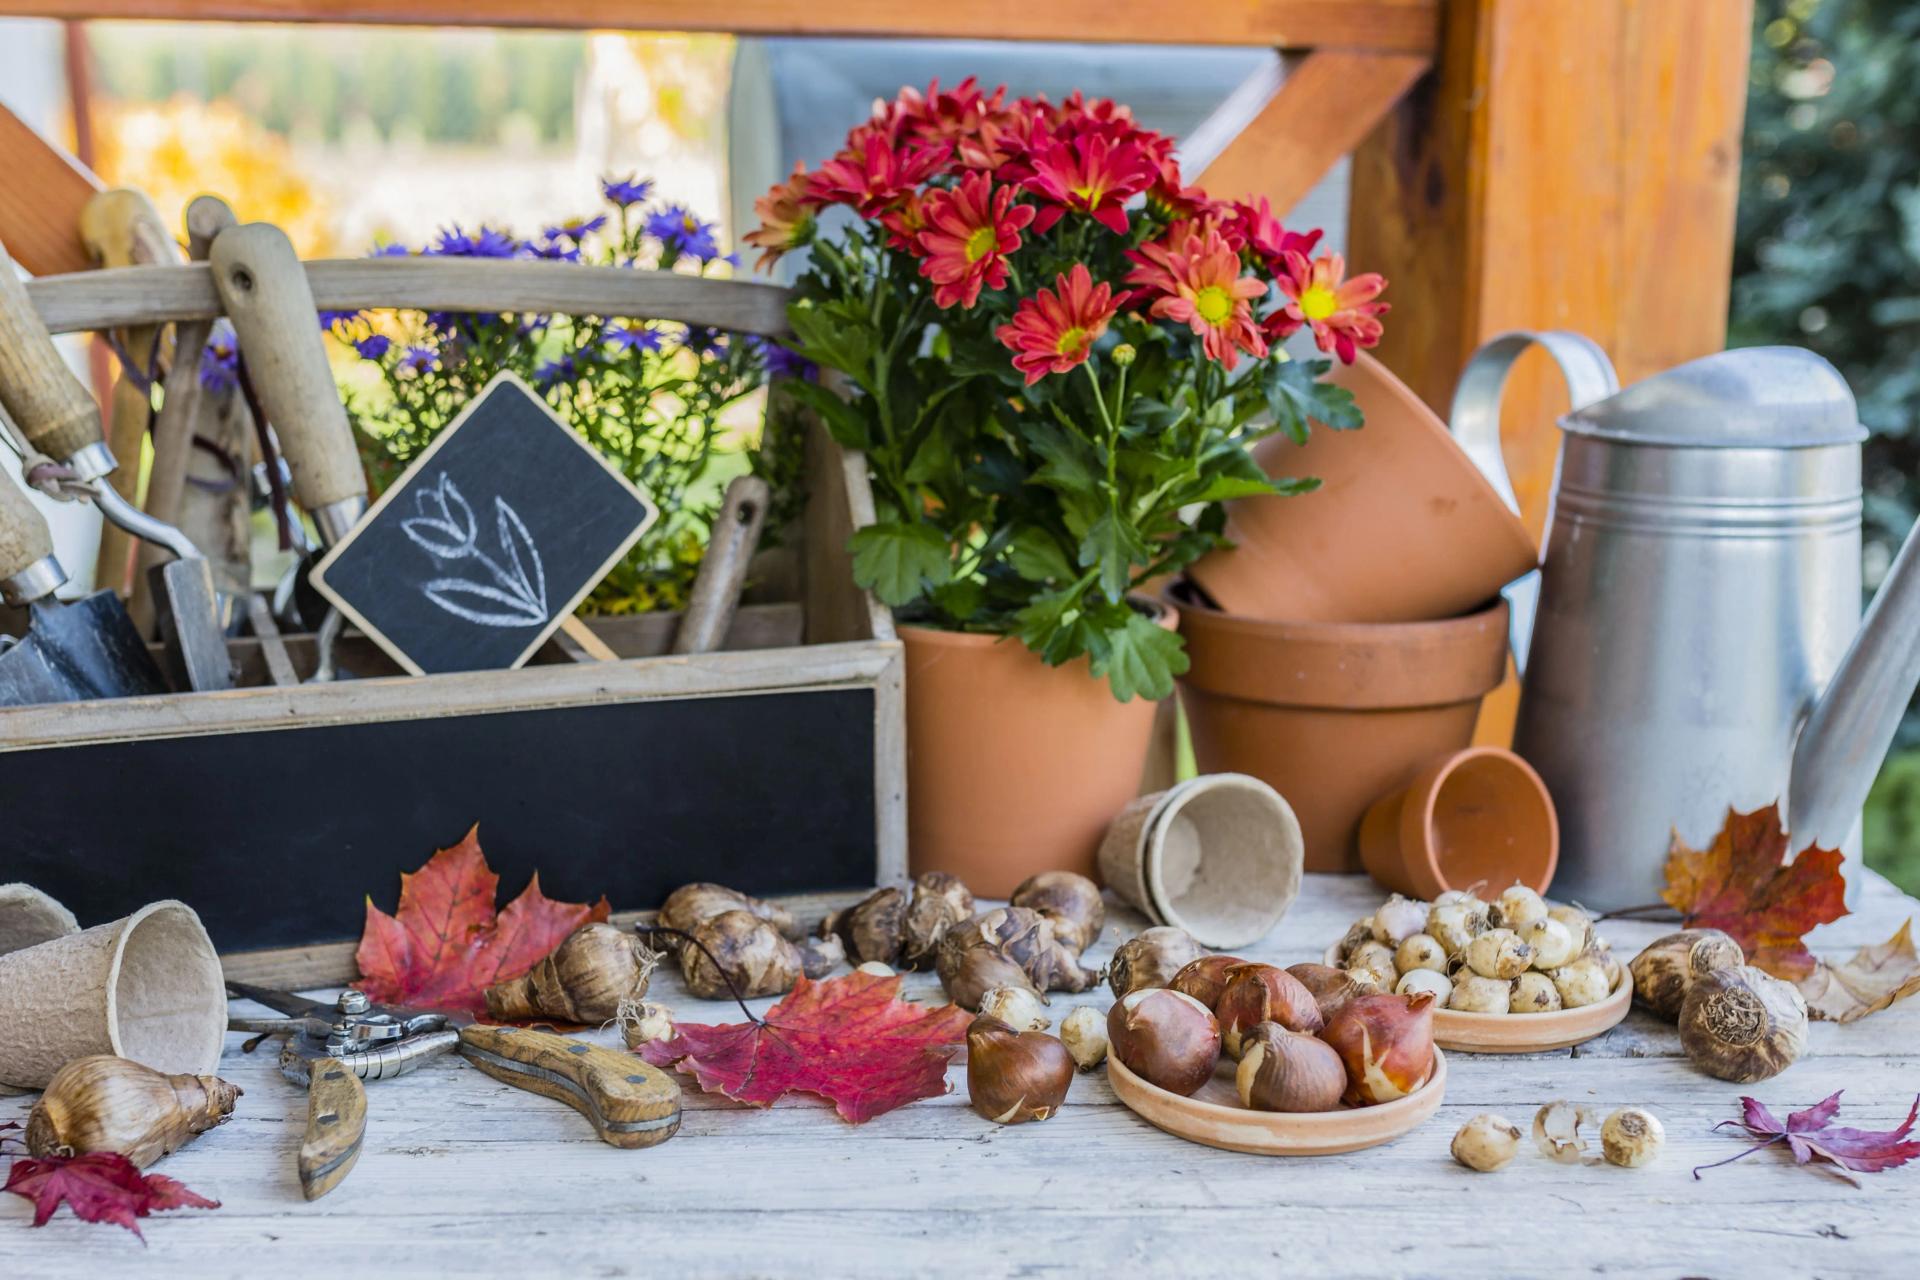 Different flower bulbs on the table with gardening tools